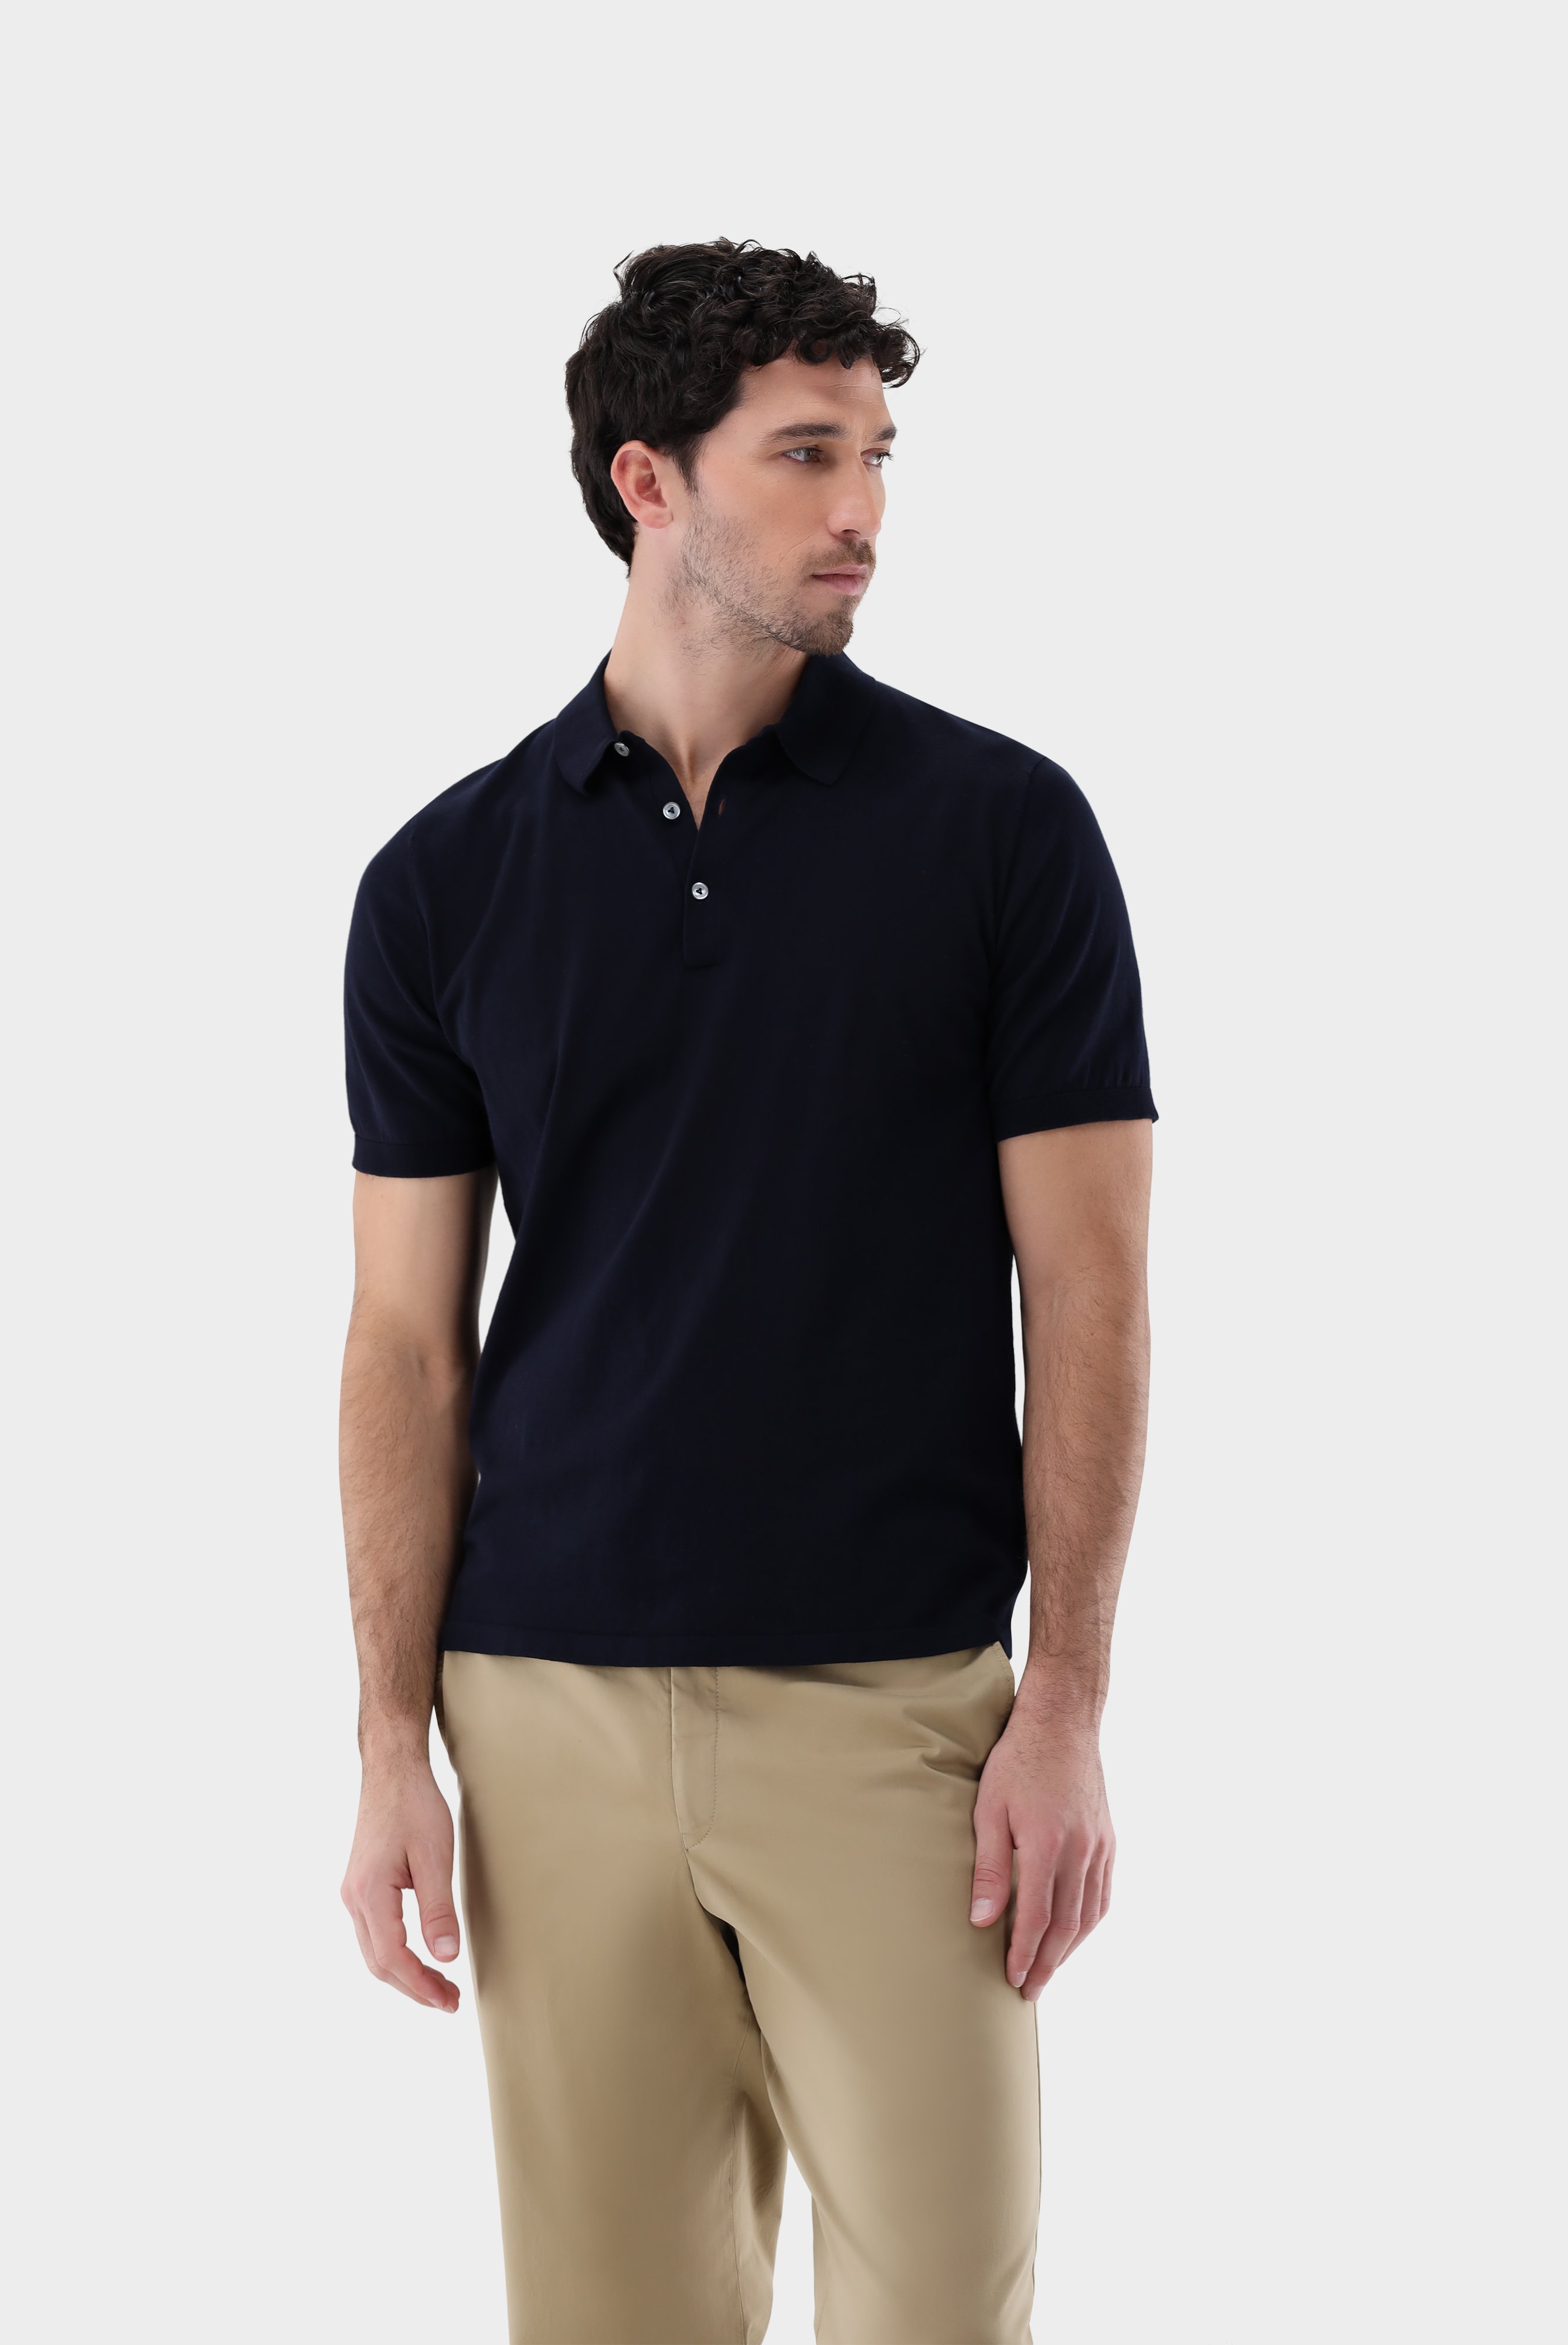 Poloshirts+Knit Polo made of Air Cotton+82.8510..S00174.795.S